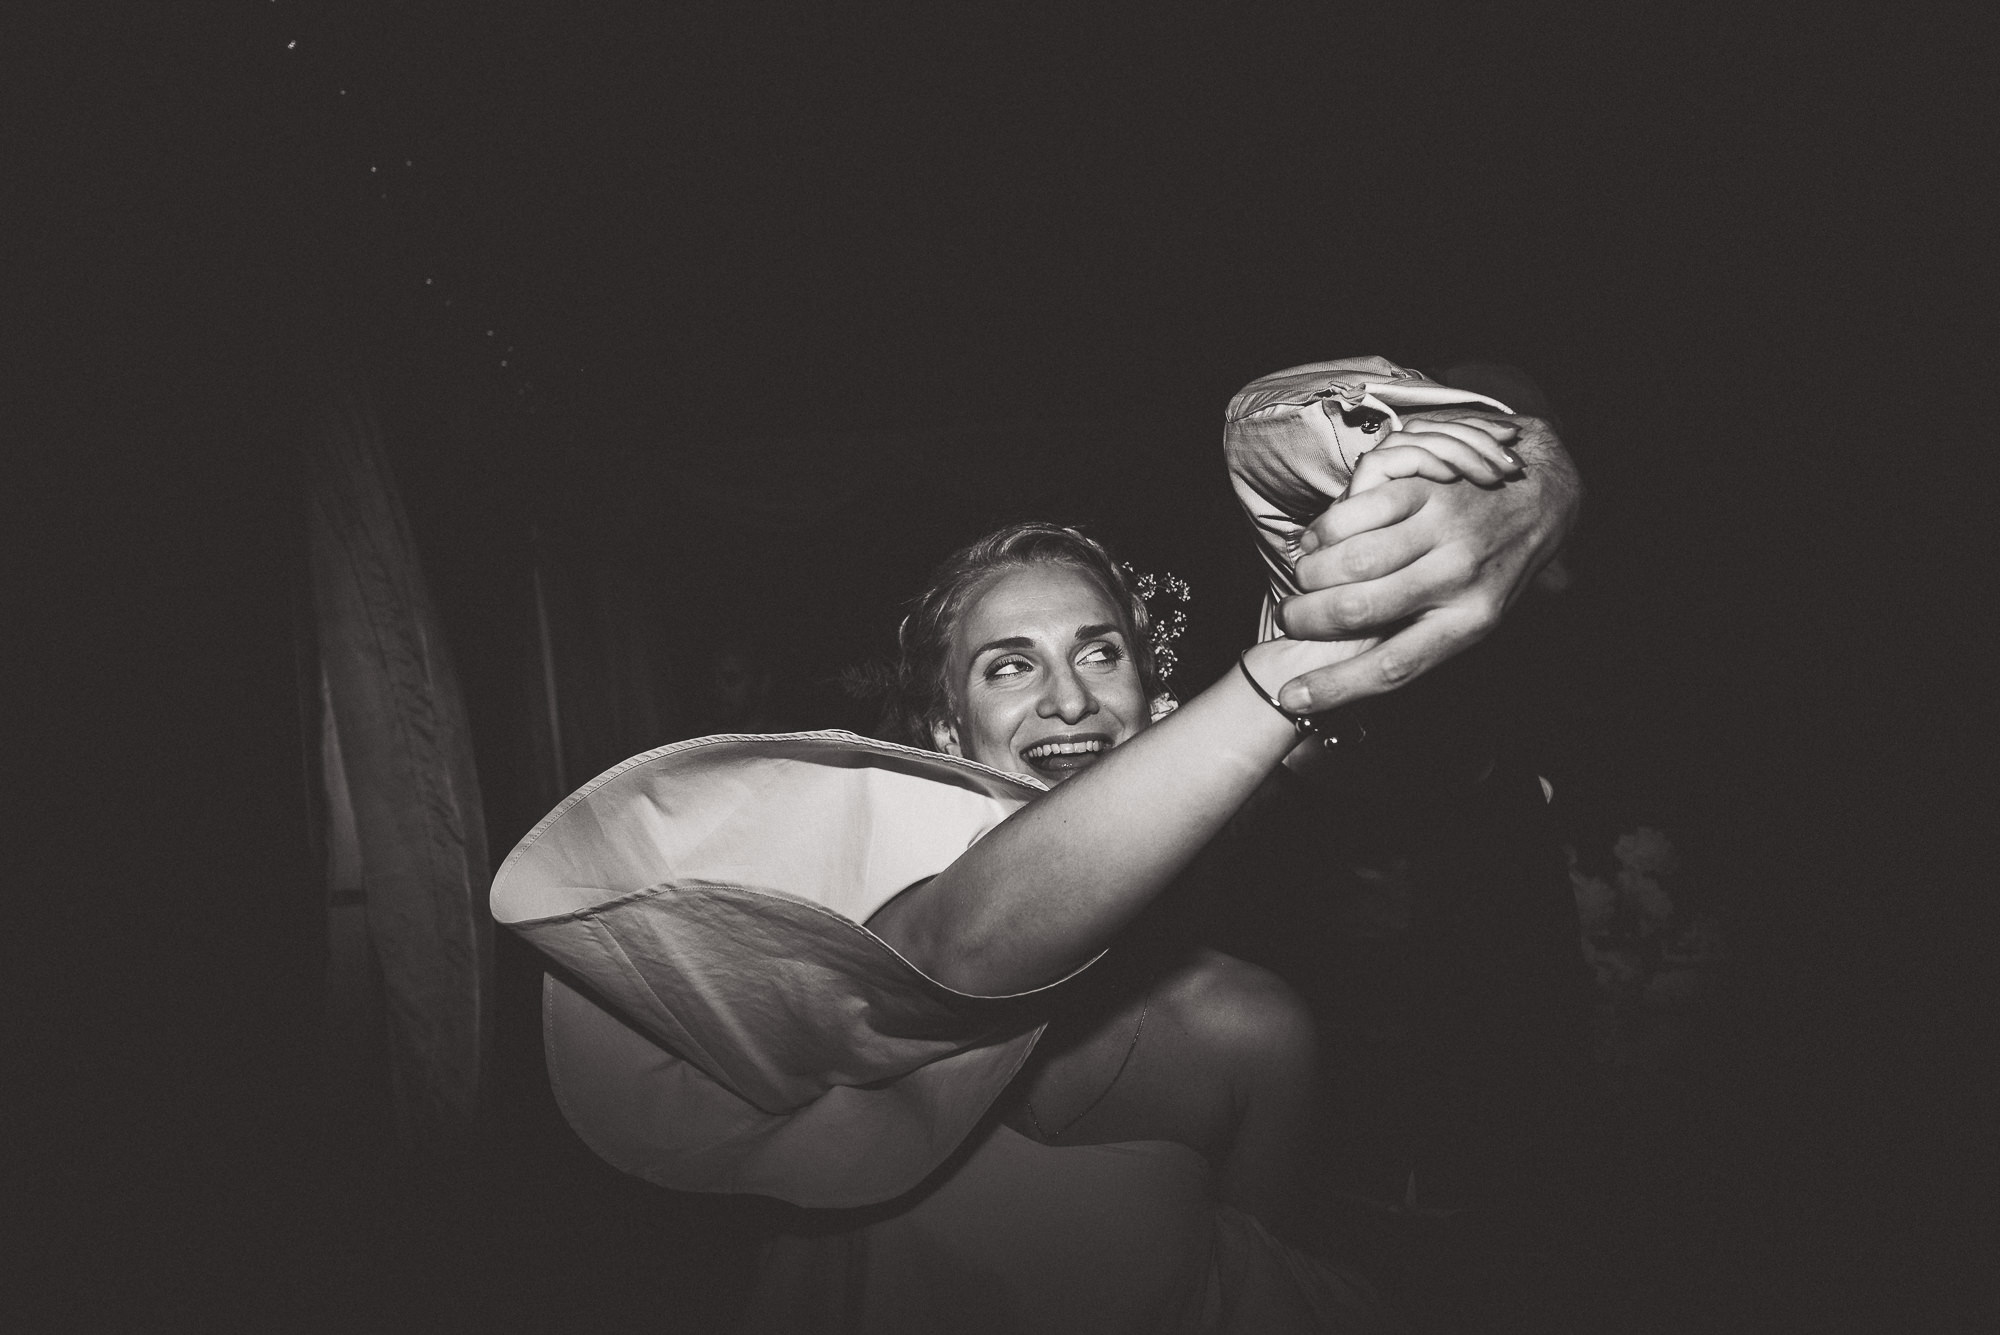 A black and white photo of a woman dancing in a dark room, resembling a bride on her wedding day.